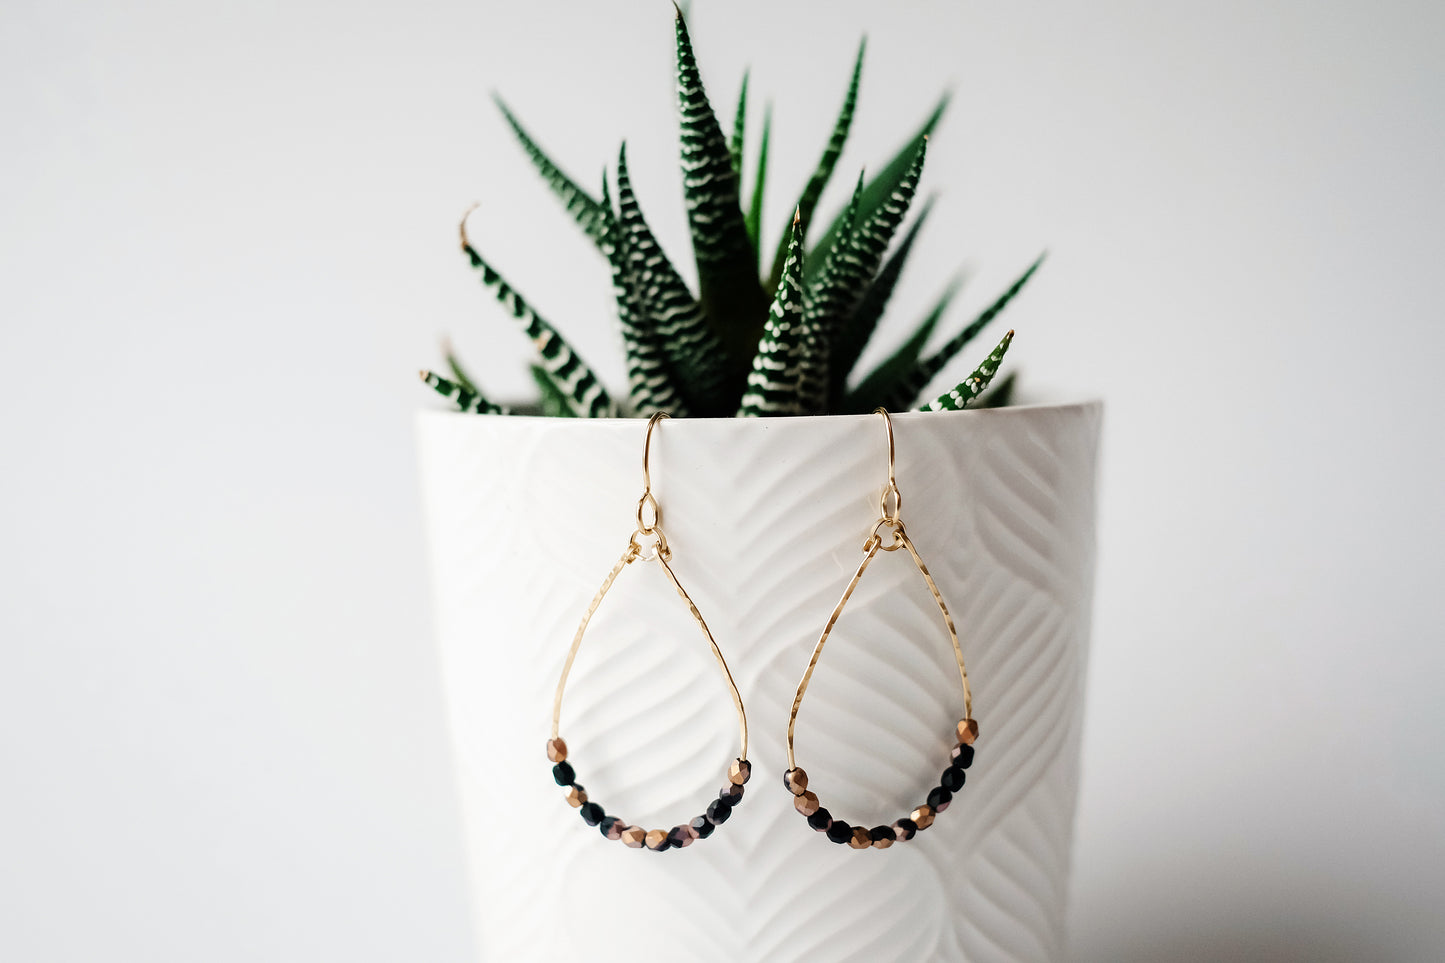 Gold wire teardrop shaped dangle earrings, strung with 12 black and pink speckled faceted glass beads that rest at the bottom of the teardrop shape, hanging from a small white planter containing a green succulent plant.